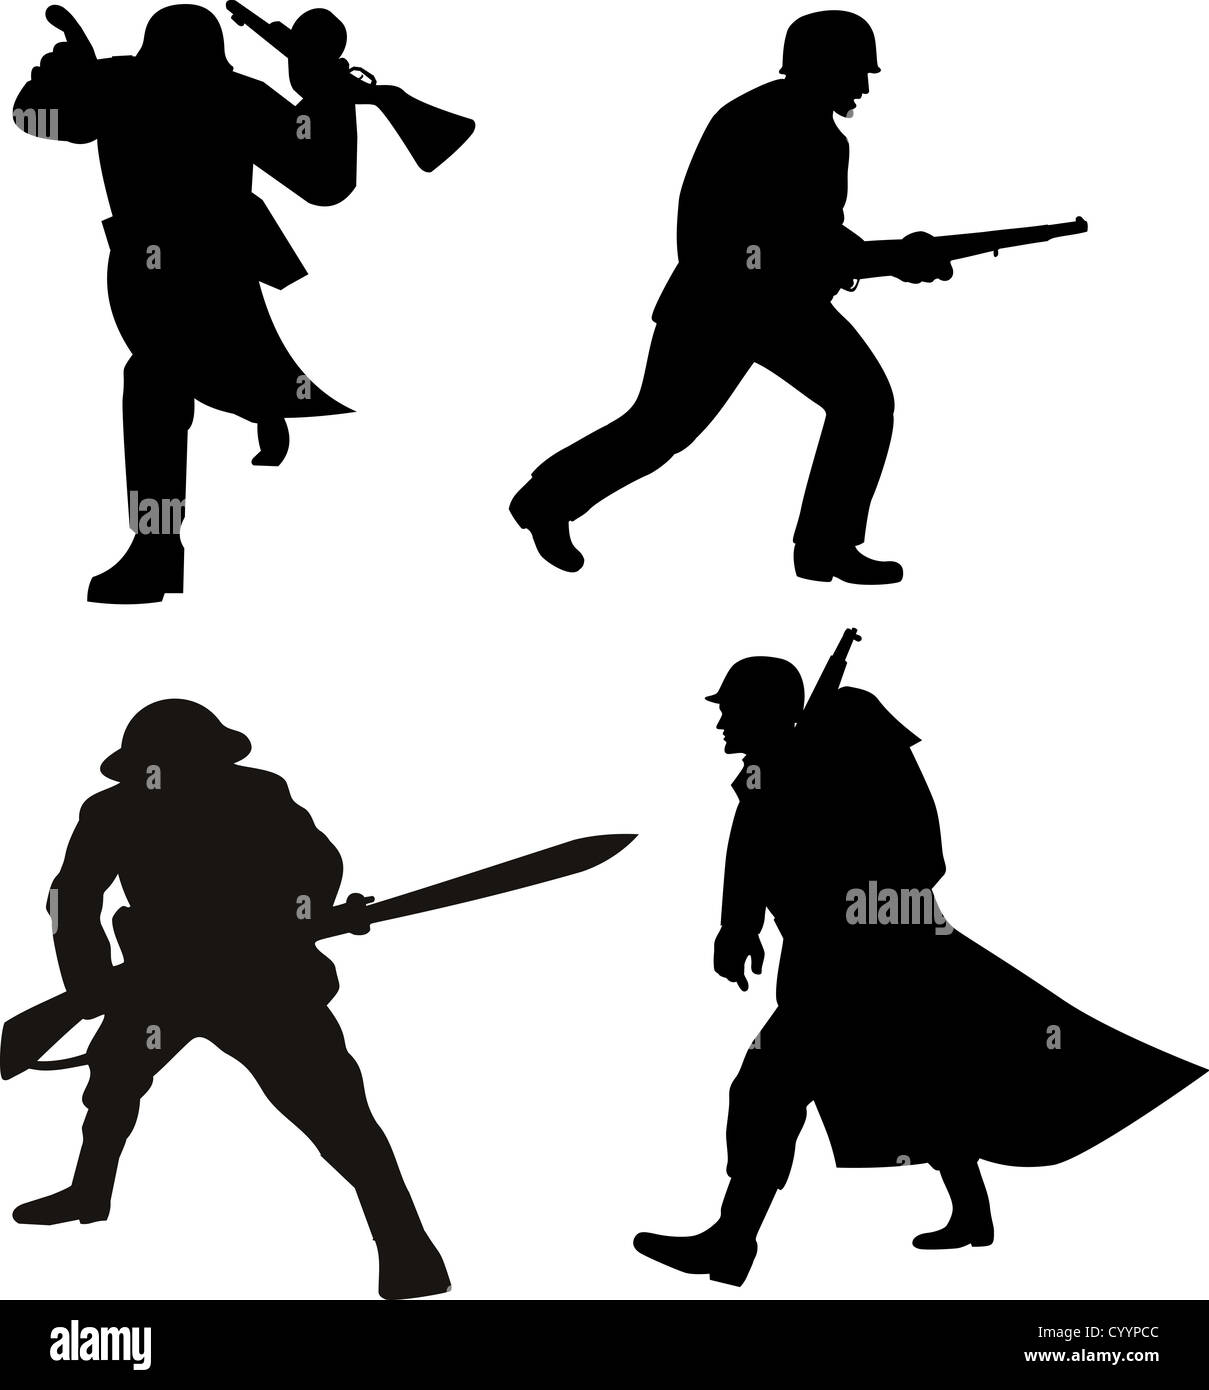 illustration of a silhouette of a soldier attacking with bayonet rifle,marching on white background Stock Photo